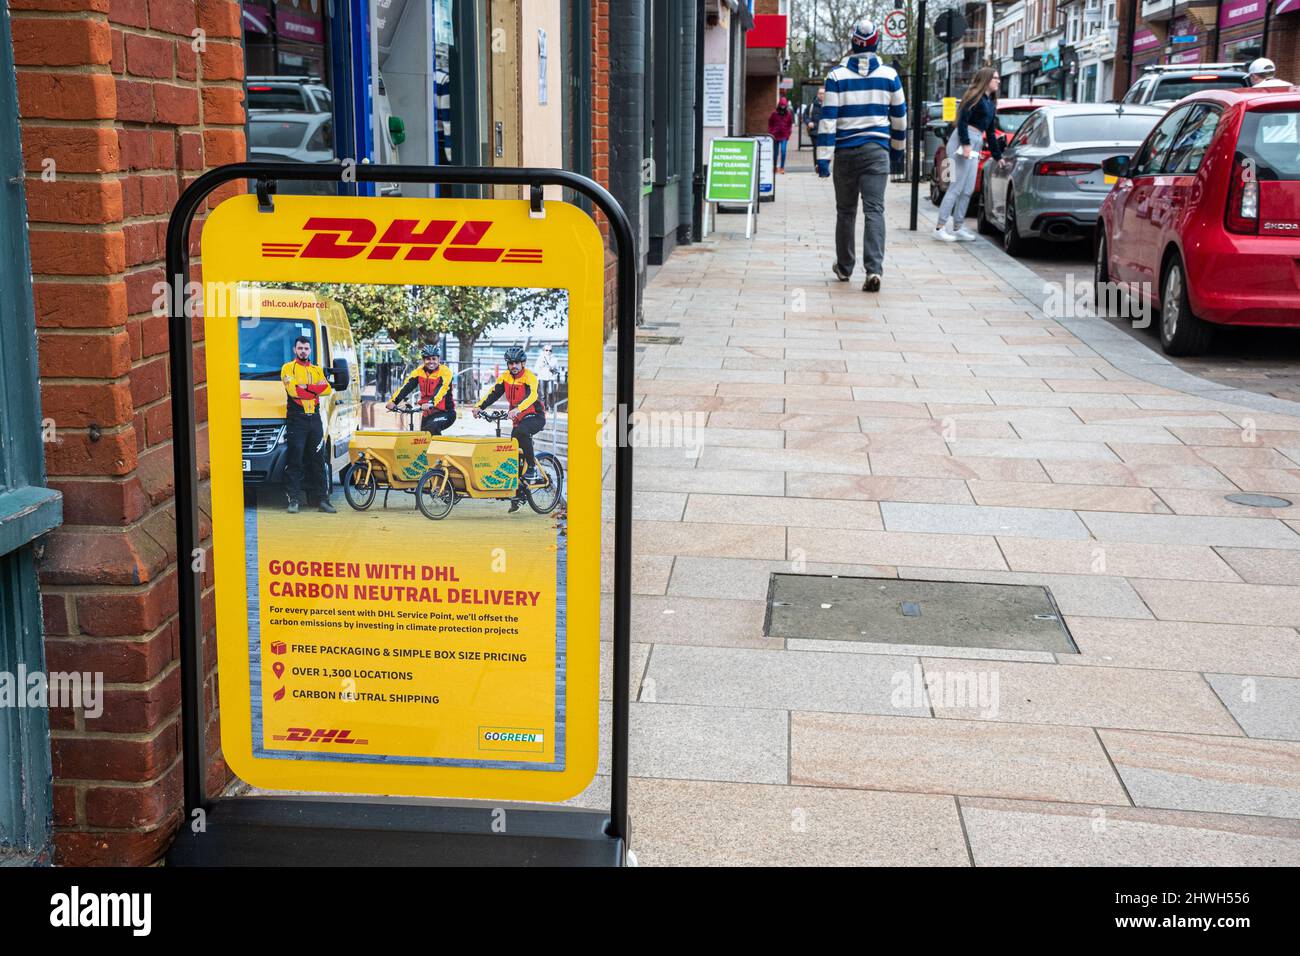 DHL sign or A-board advertising their Go Green with DHL carbon neutral delivery scheme, Camberley High Street, Surrey, UK Stock Photo